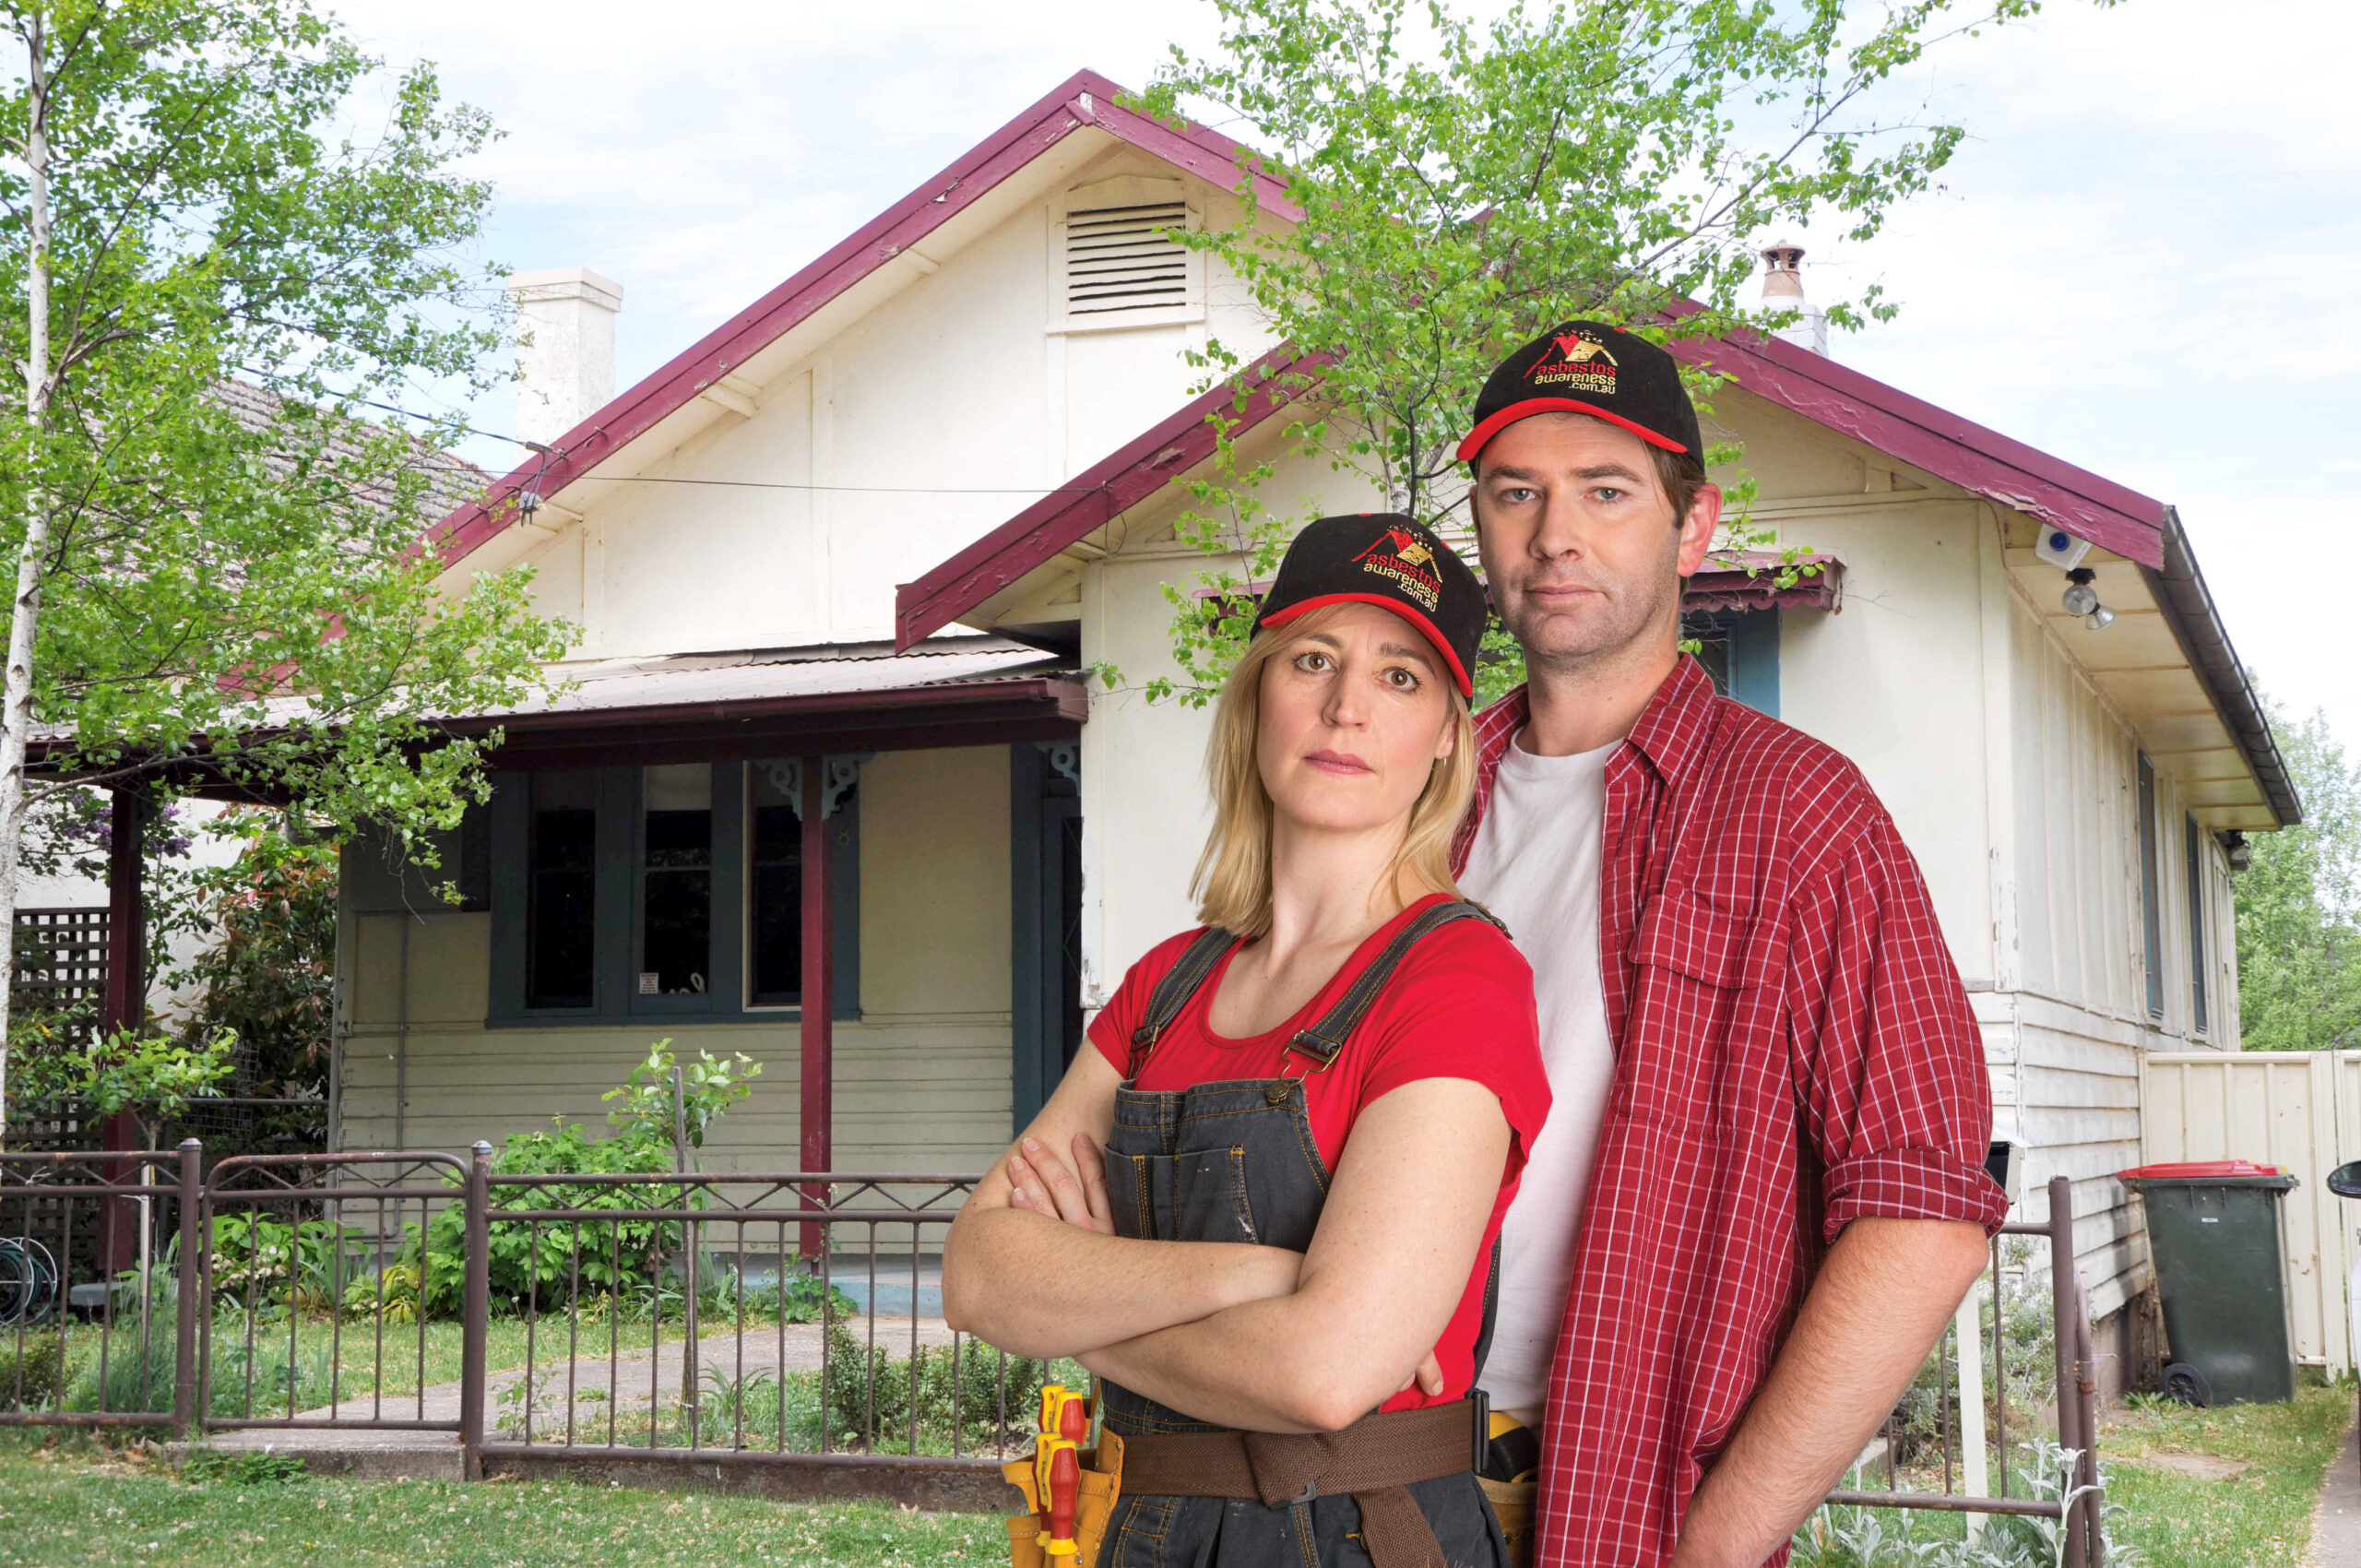 Couple wearing renovating clothes and Asbestos Awareness hats stand in front of hold home with stern expressions.